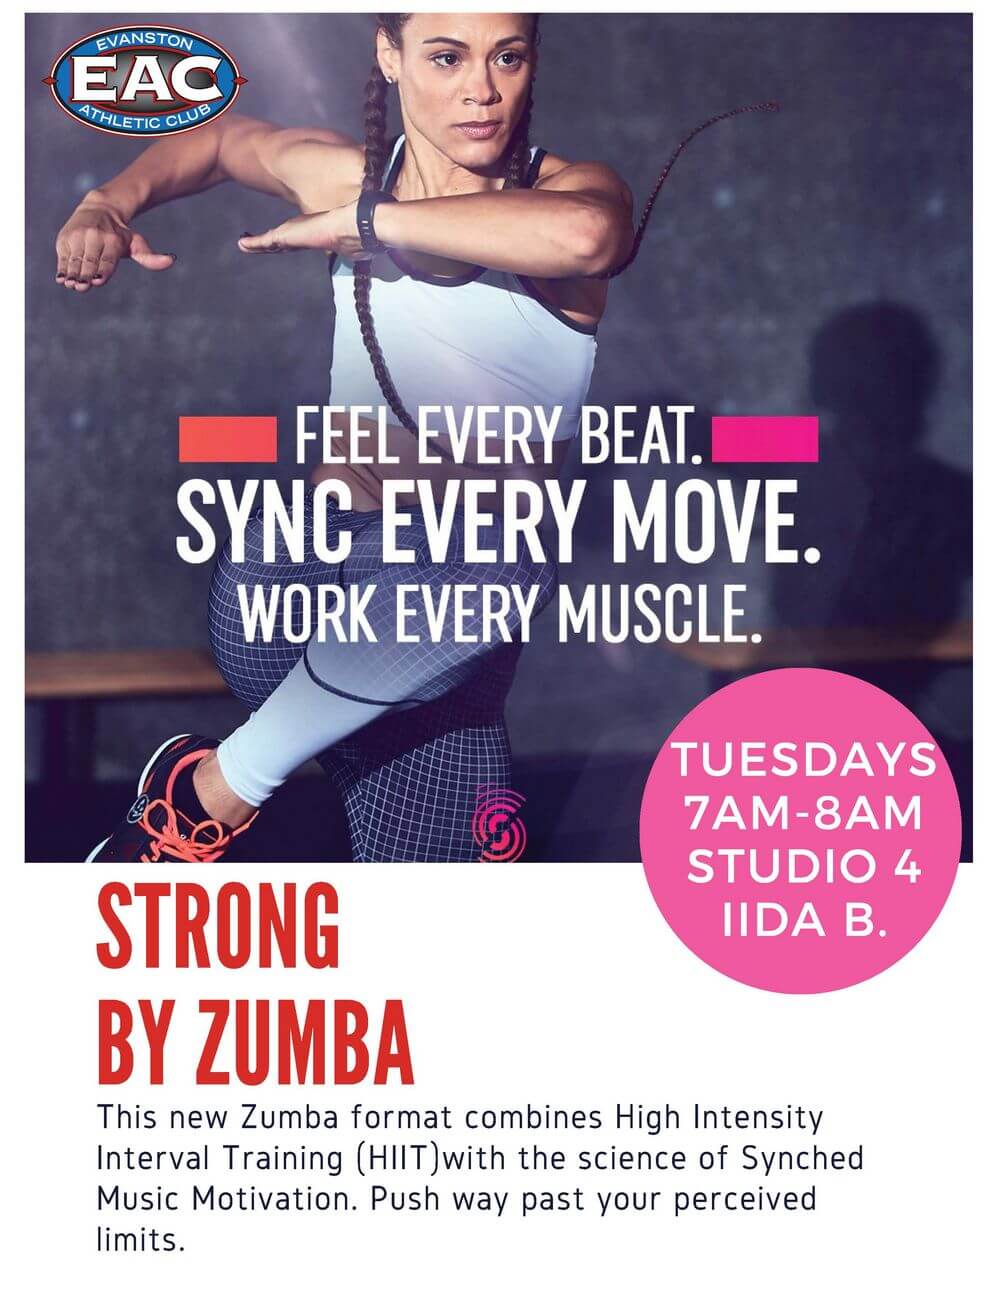 Strong by Zumba EAC.jpg